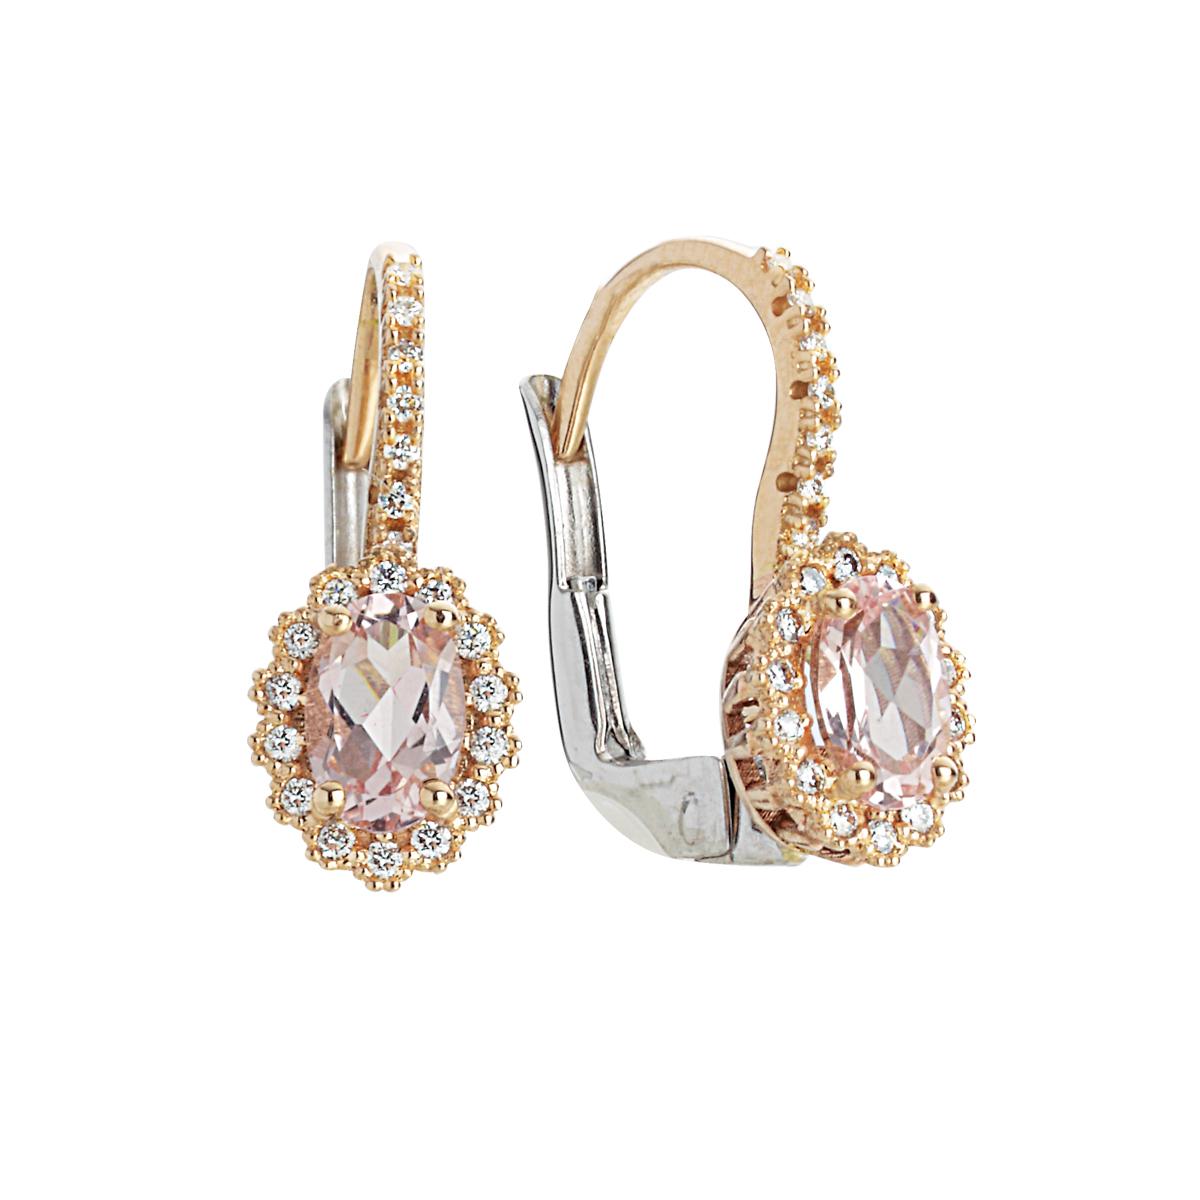 Hook earrings in 18kt gold with Diamonds and Morganite - OD394/MO-LH